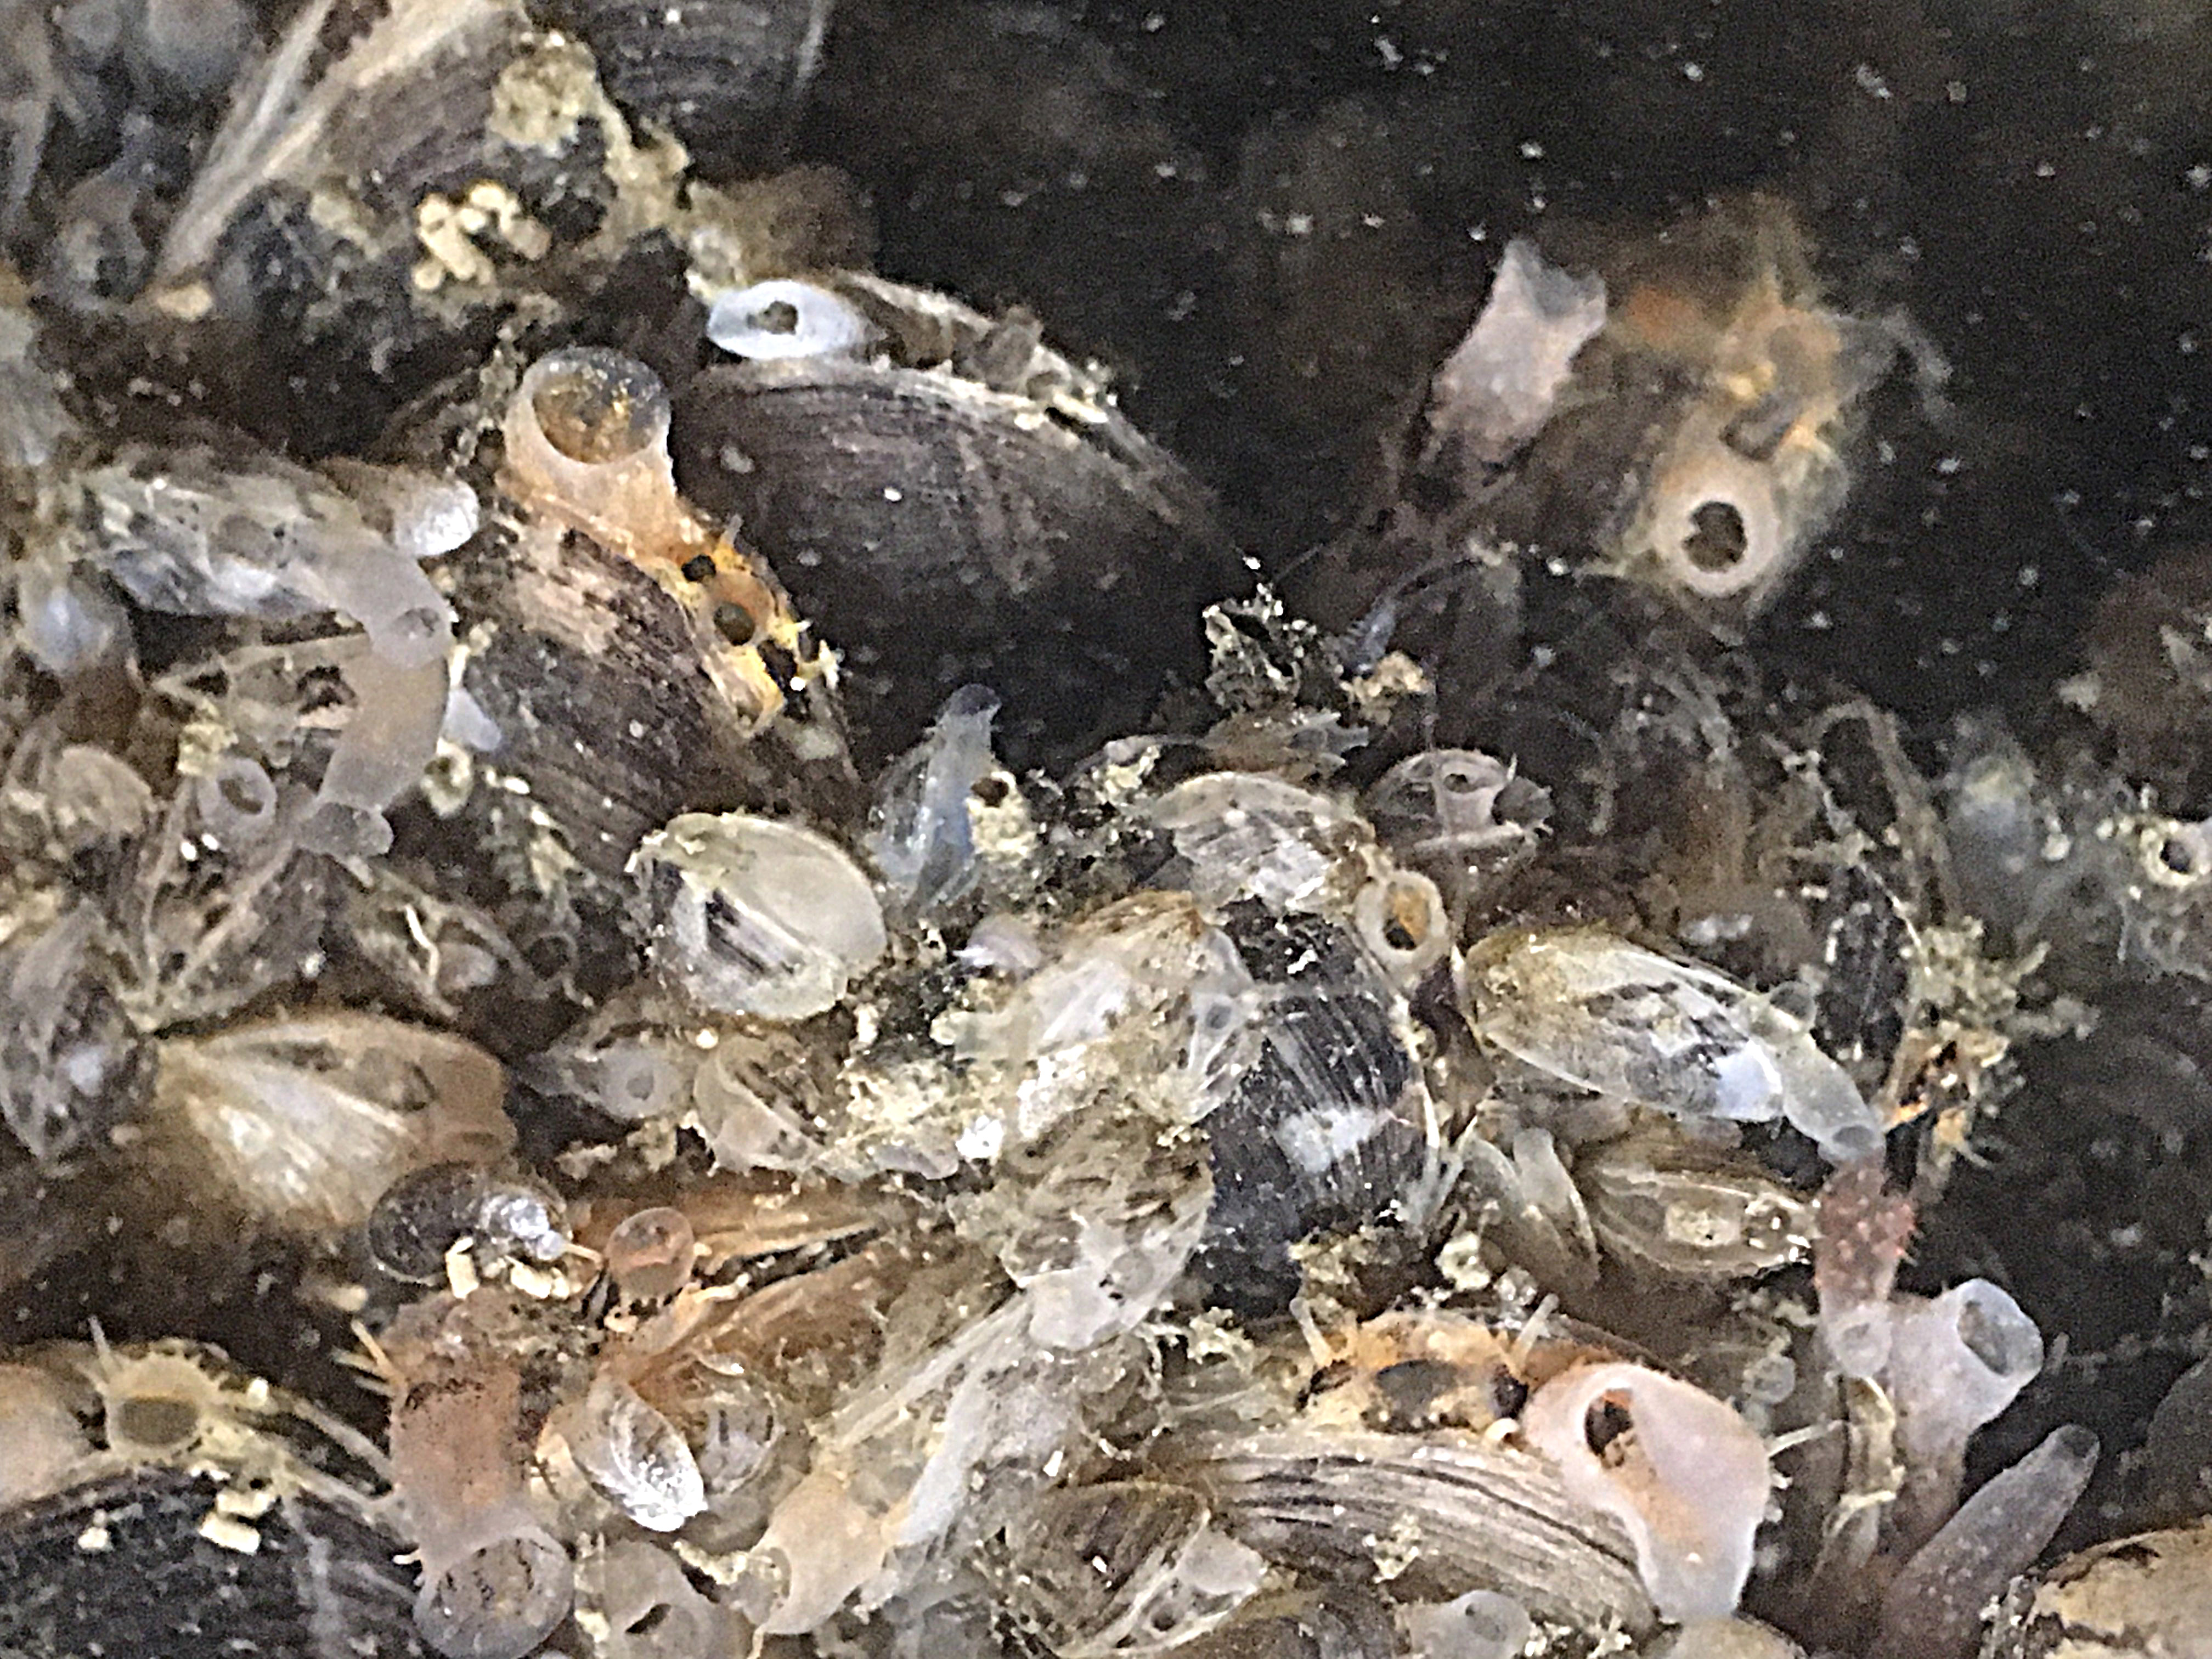 a closeup of about 13 mussels, many with their siphons protruding